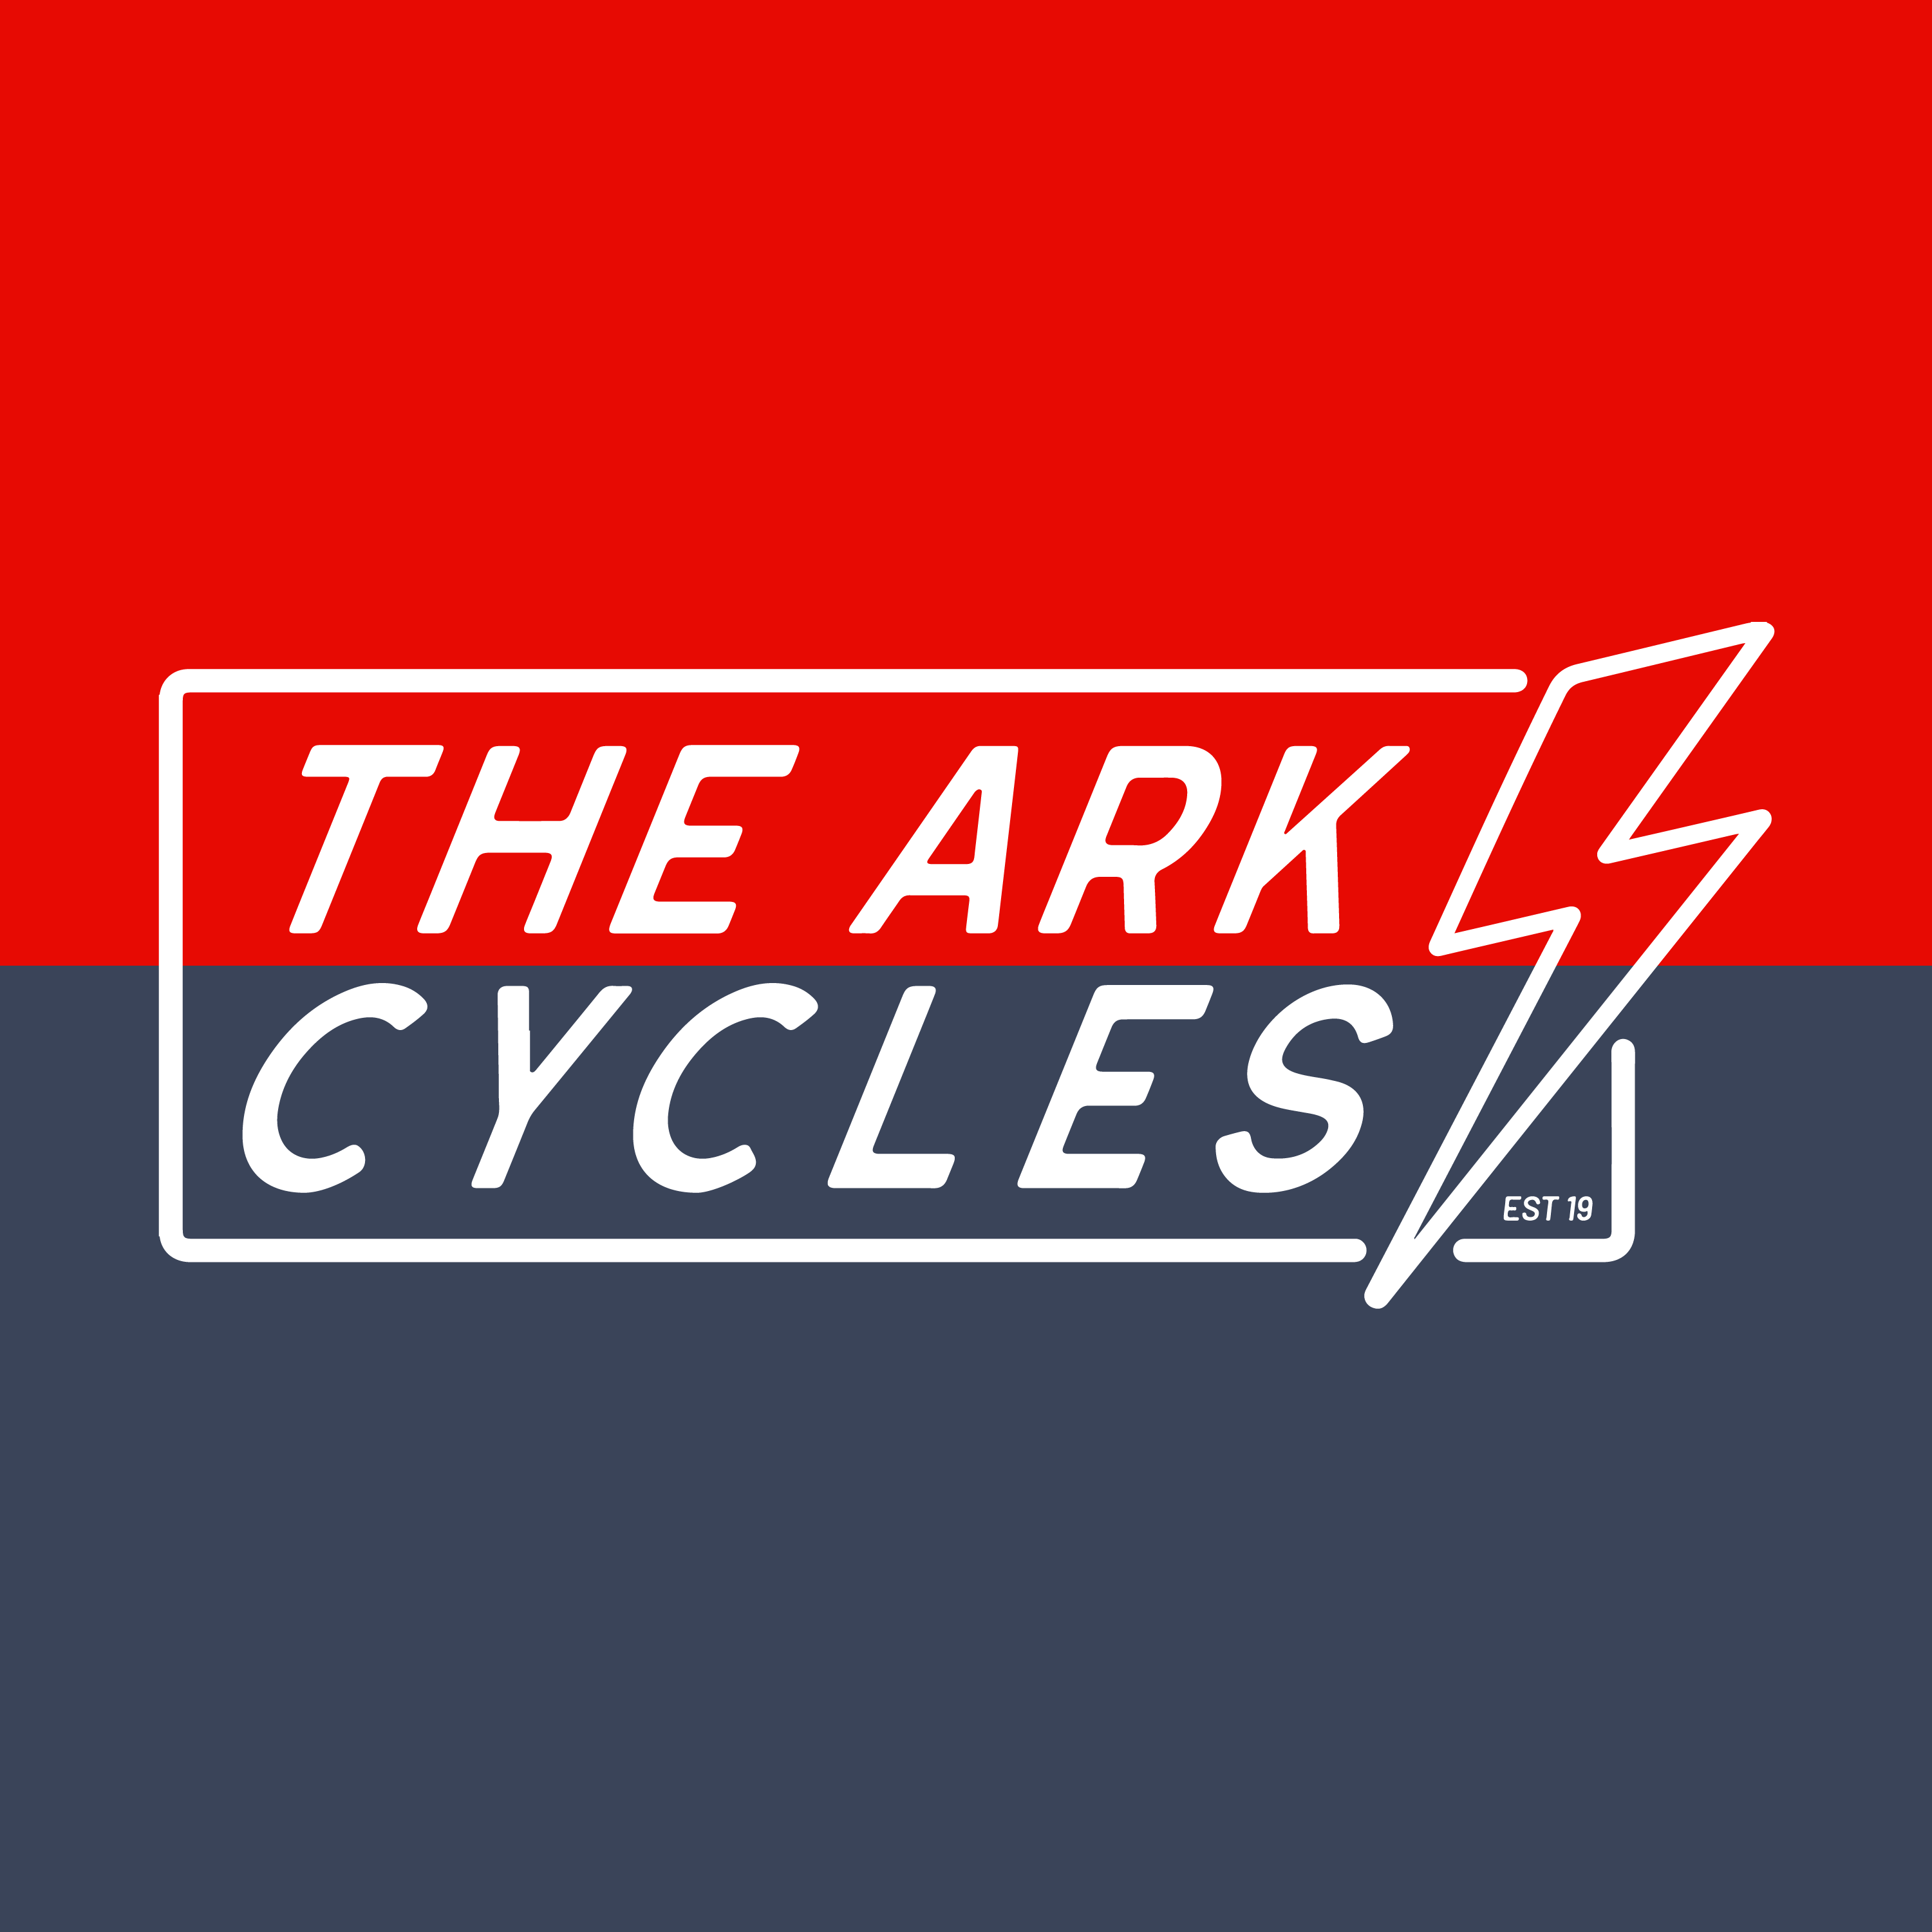 Club Image for THE ARK CYCLES